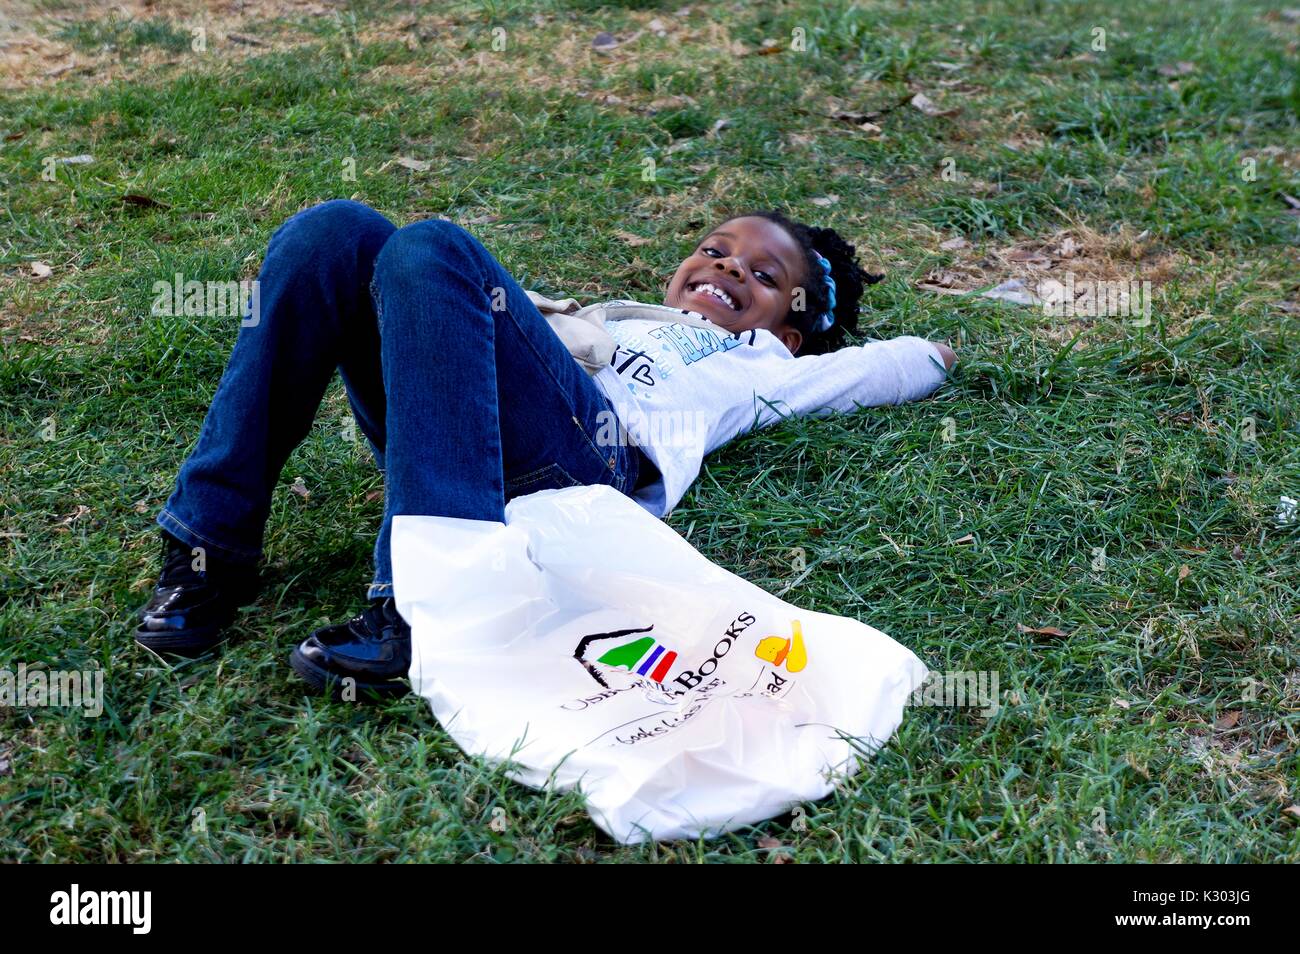 A young girl smiling and laying down in the grass with a plastic bag at the Baltimore Book Festival in Baltimore, Maryland, September, 2013. Stock Photo